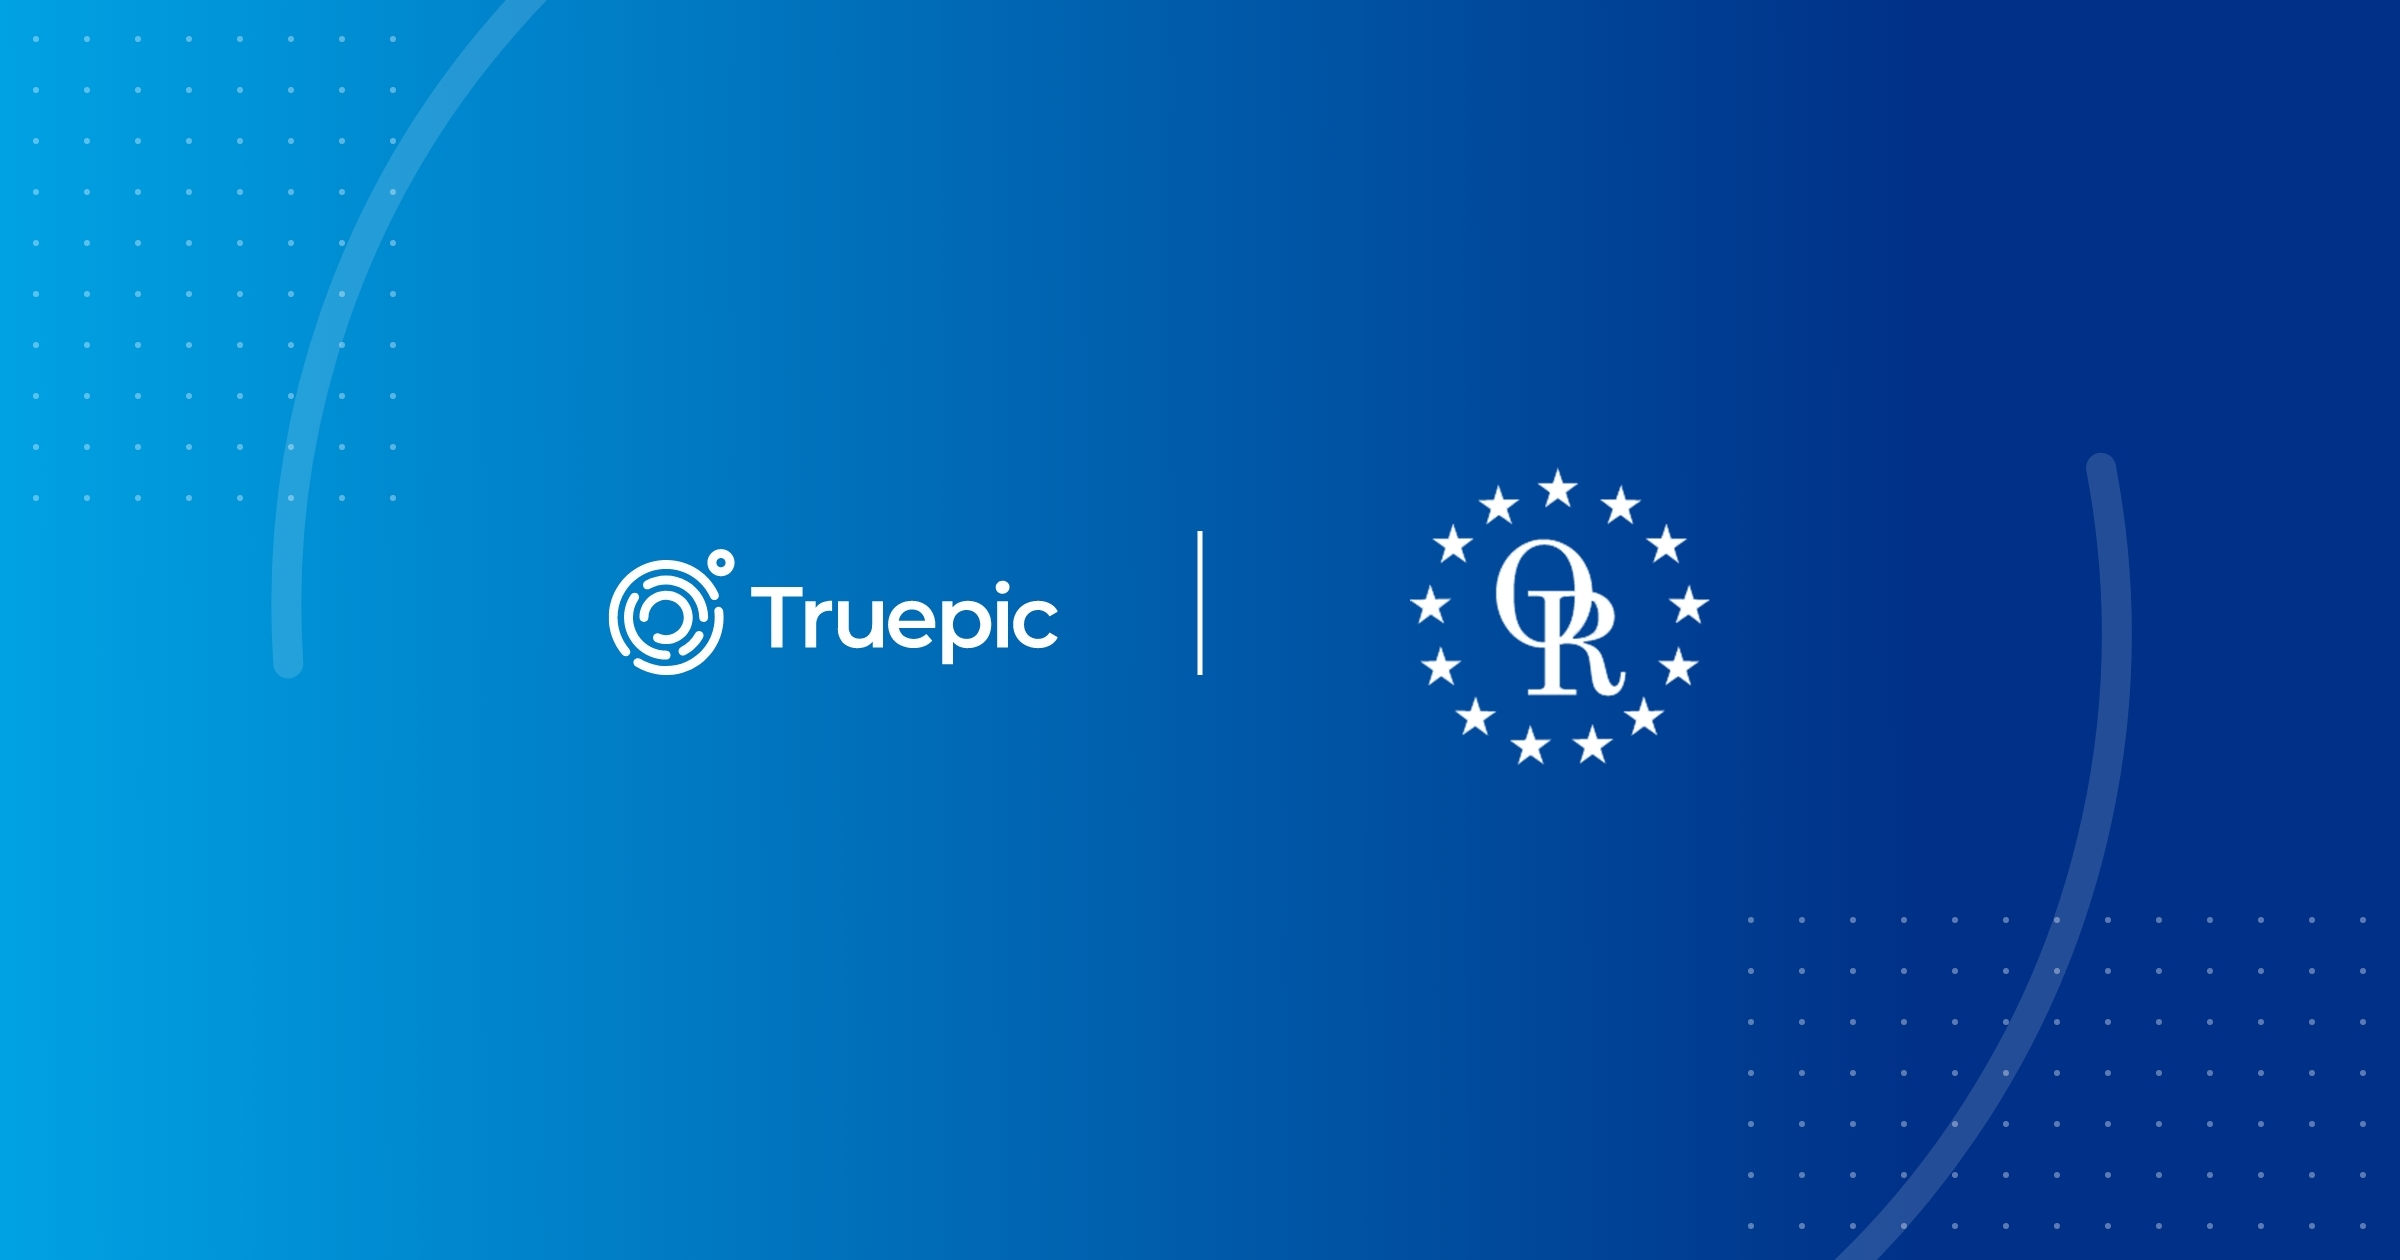 Old Republic Uses Truepic’s Image Authentication Technology for Warranty Inspections